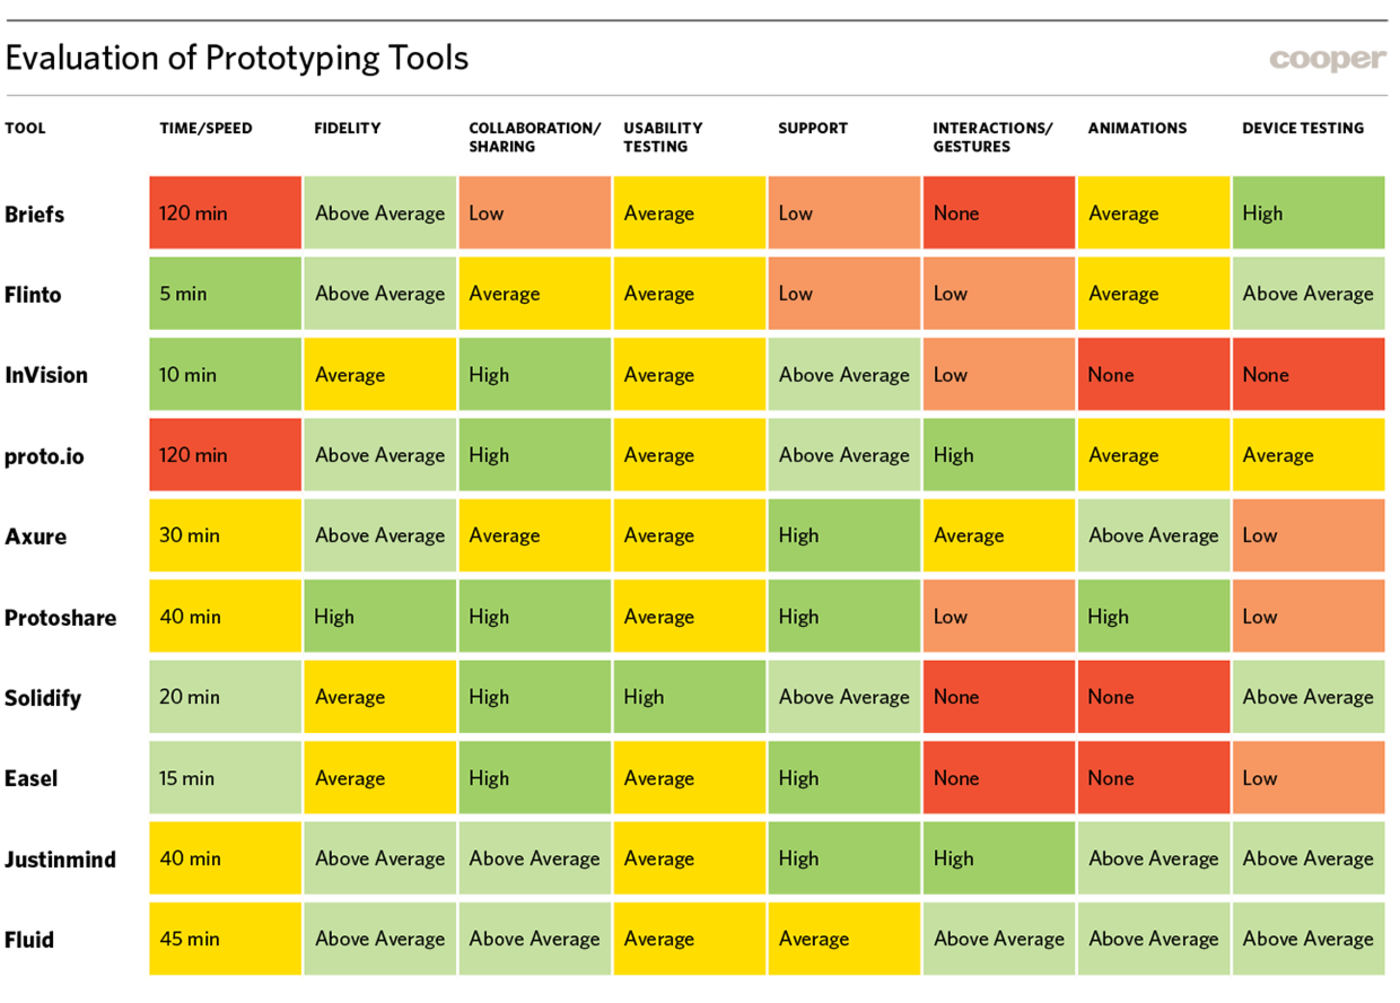 Evaluation of prototyping tools